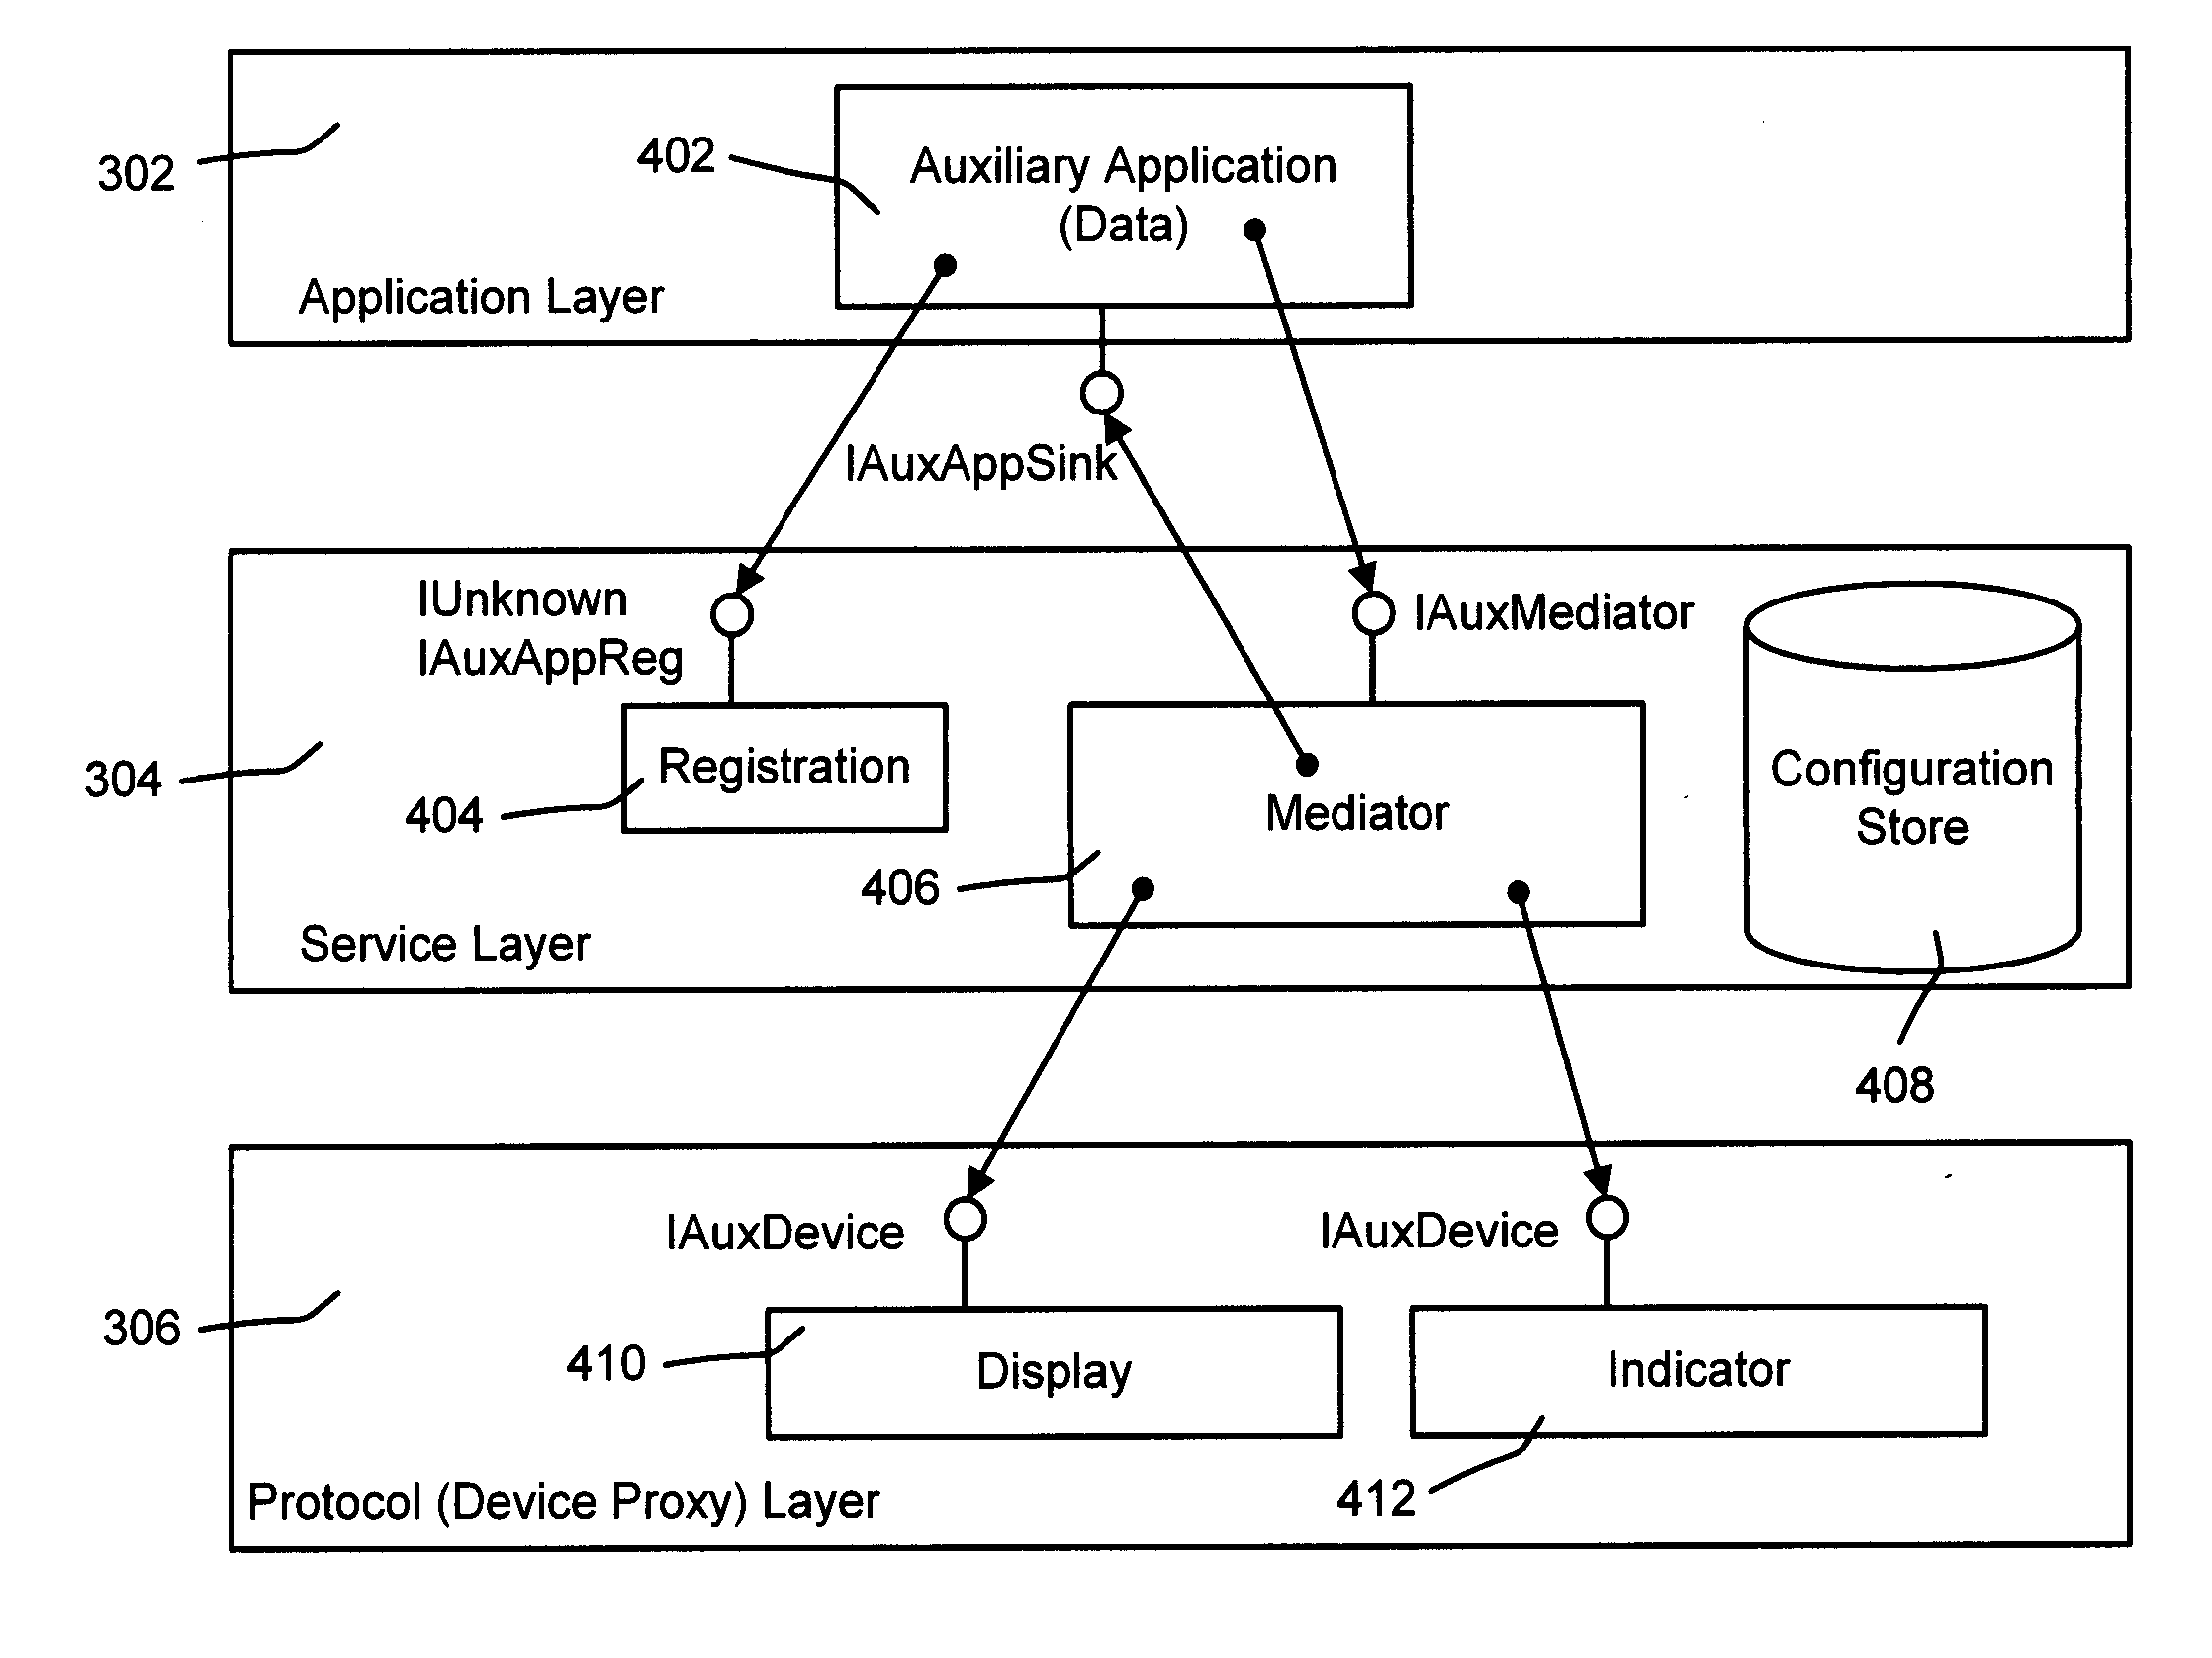 Processing information received at an auxiliary computing device